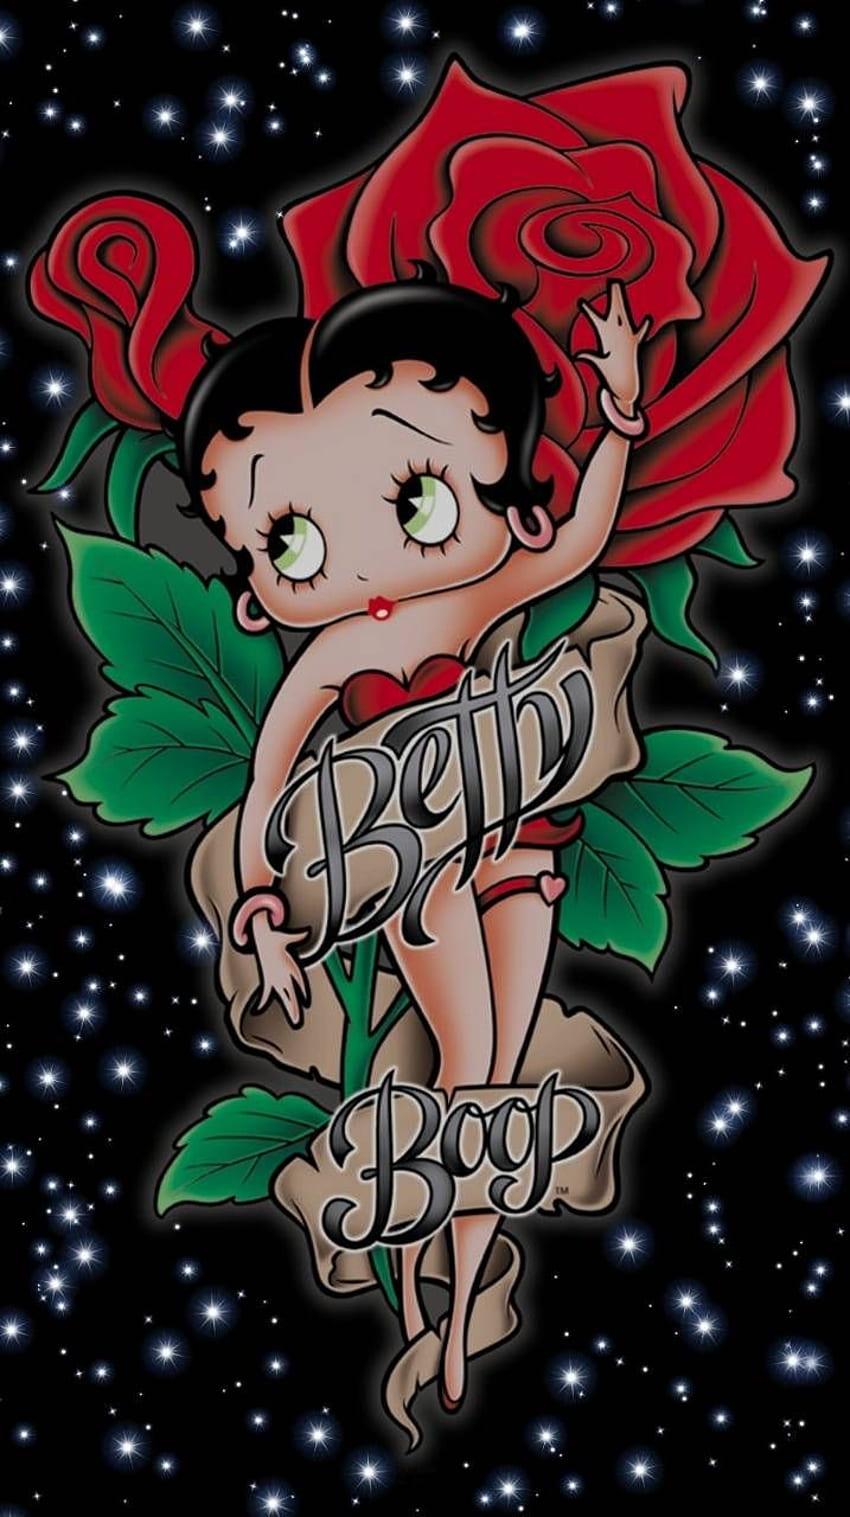 Betty Boop Pictures Archive Betty Boop angel images  Betty boop tattoos Betty  boop art Betty boop pictures